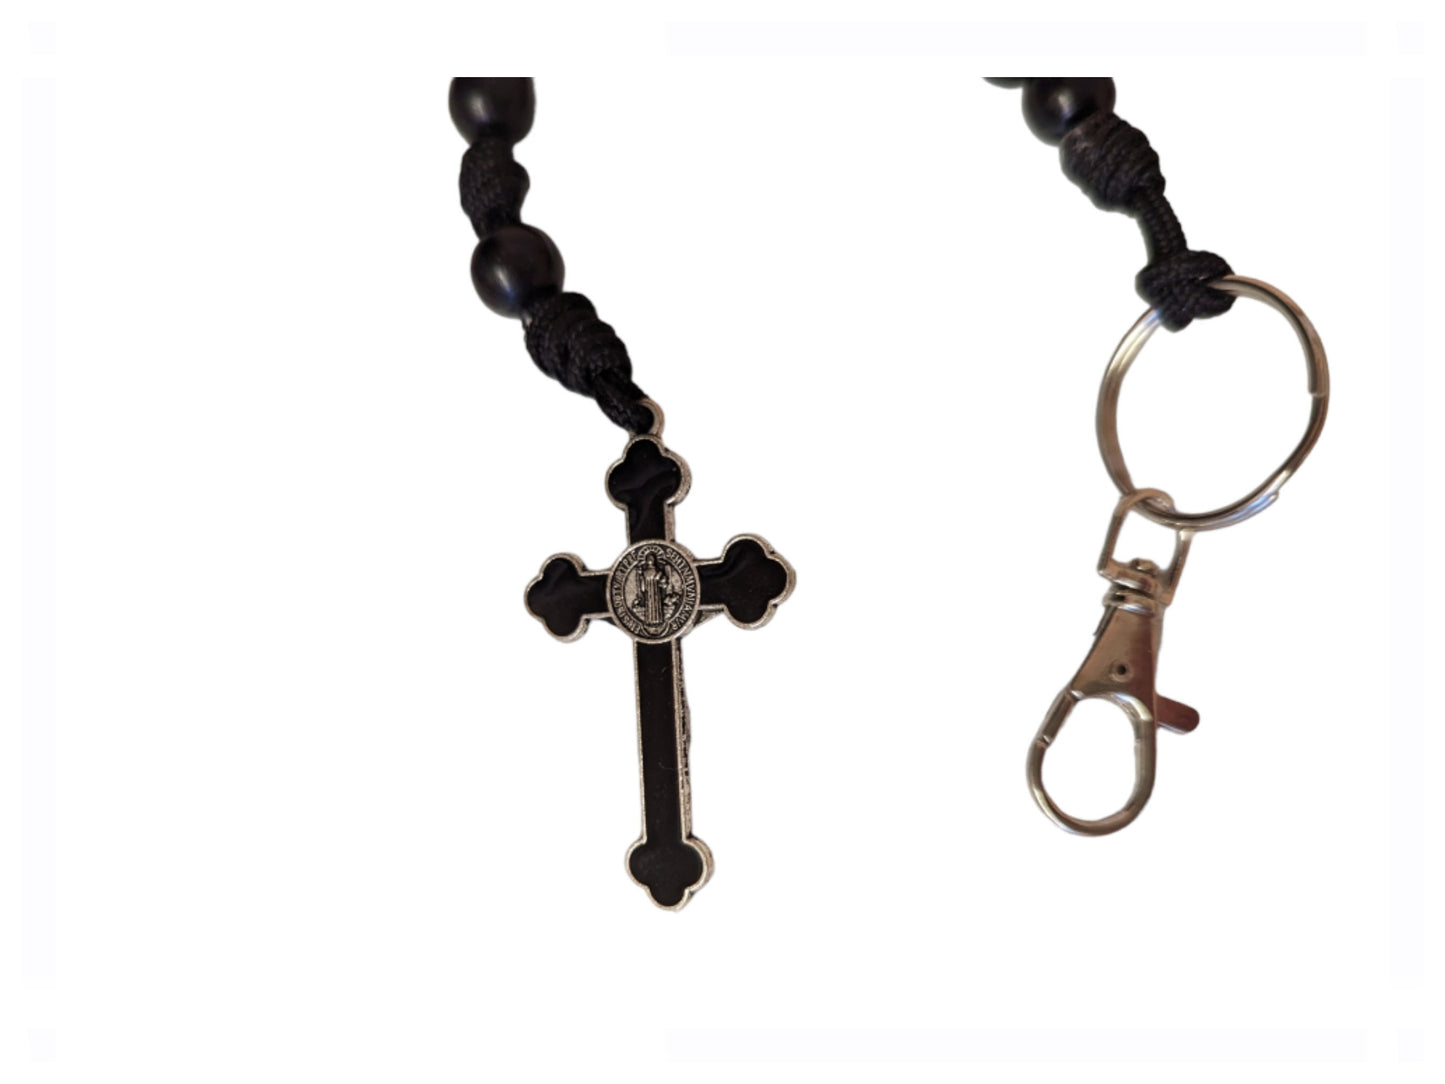 Paracord Black Rosary keyring, Black St Benedict crucifix, One decade metal & knot Rosary, Strong, Catholic Rosary, Pilgrimages, Knotted Rosary, Unbreakable, Waterproof